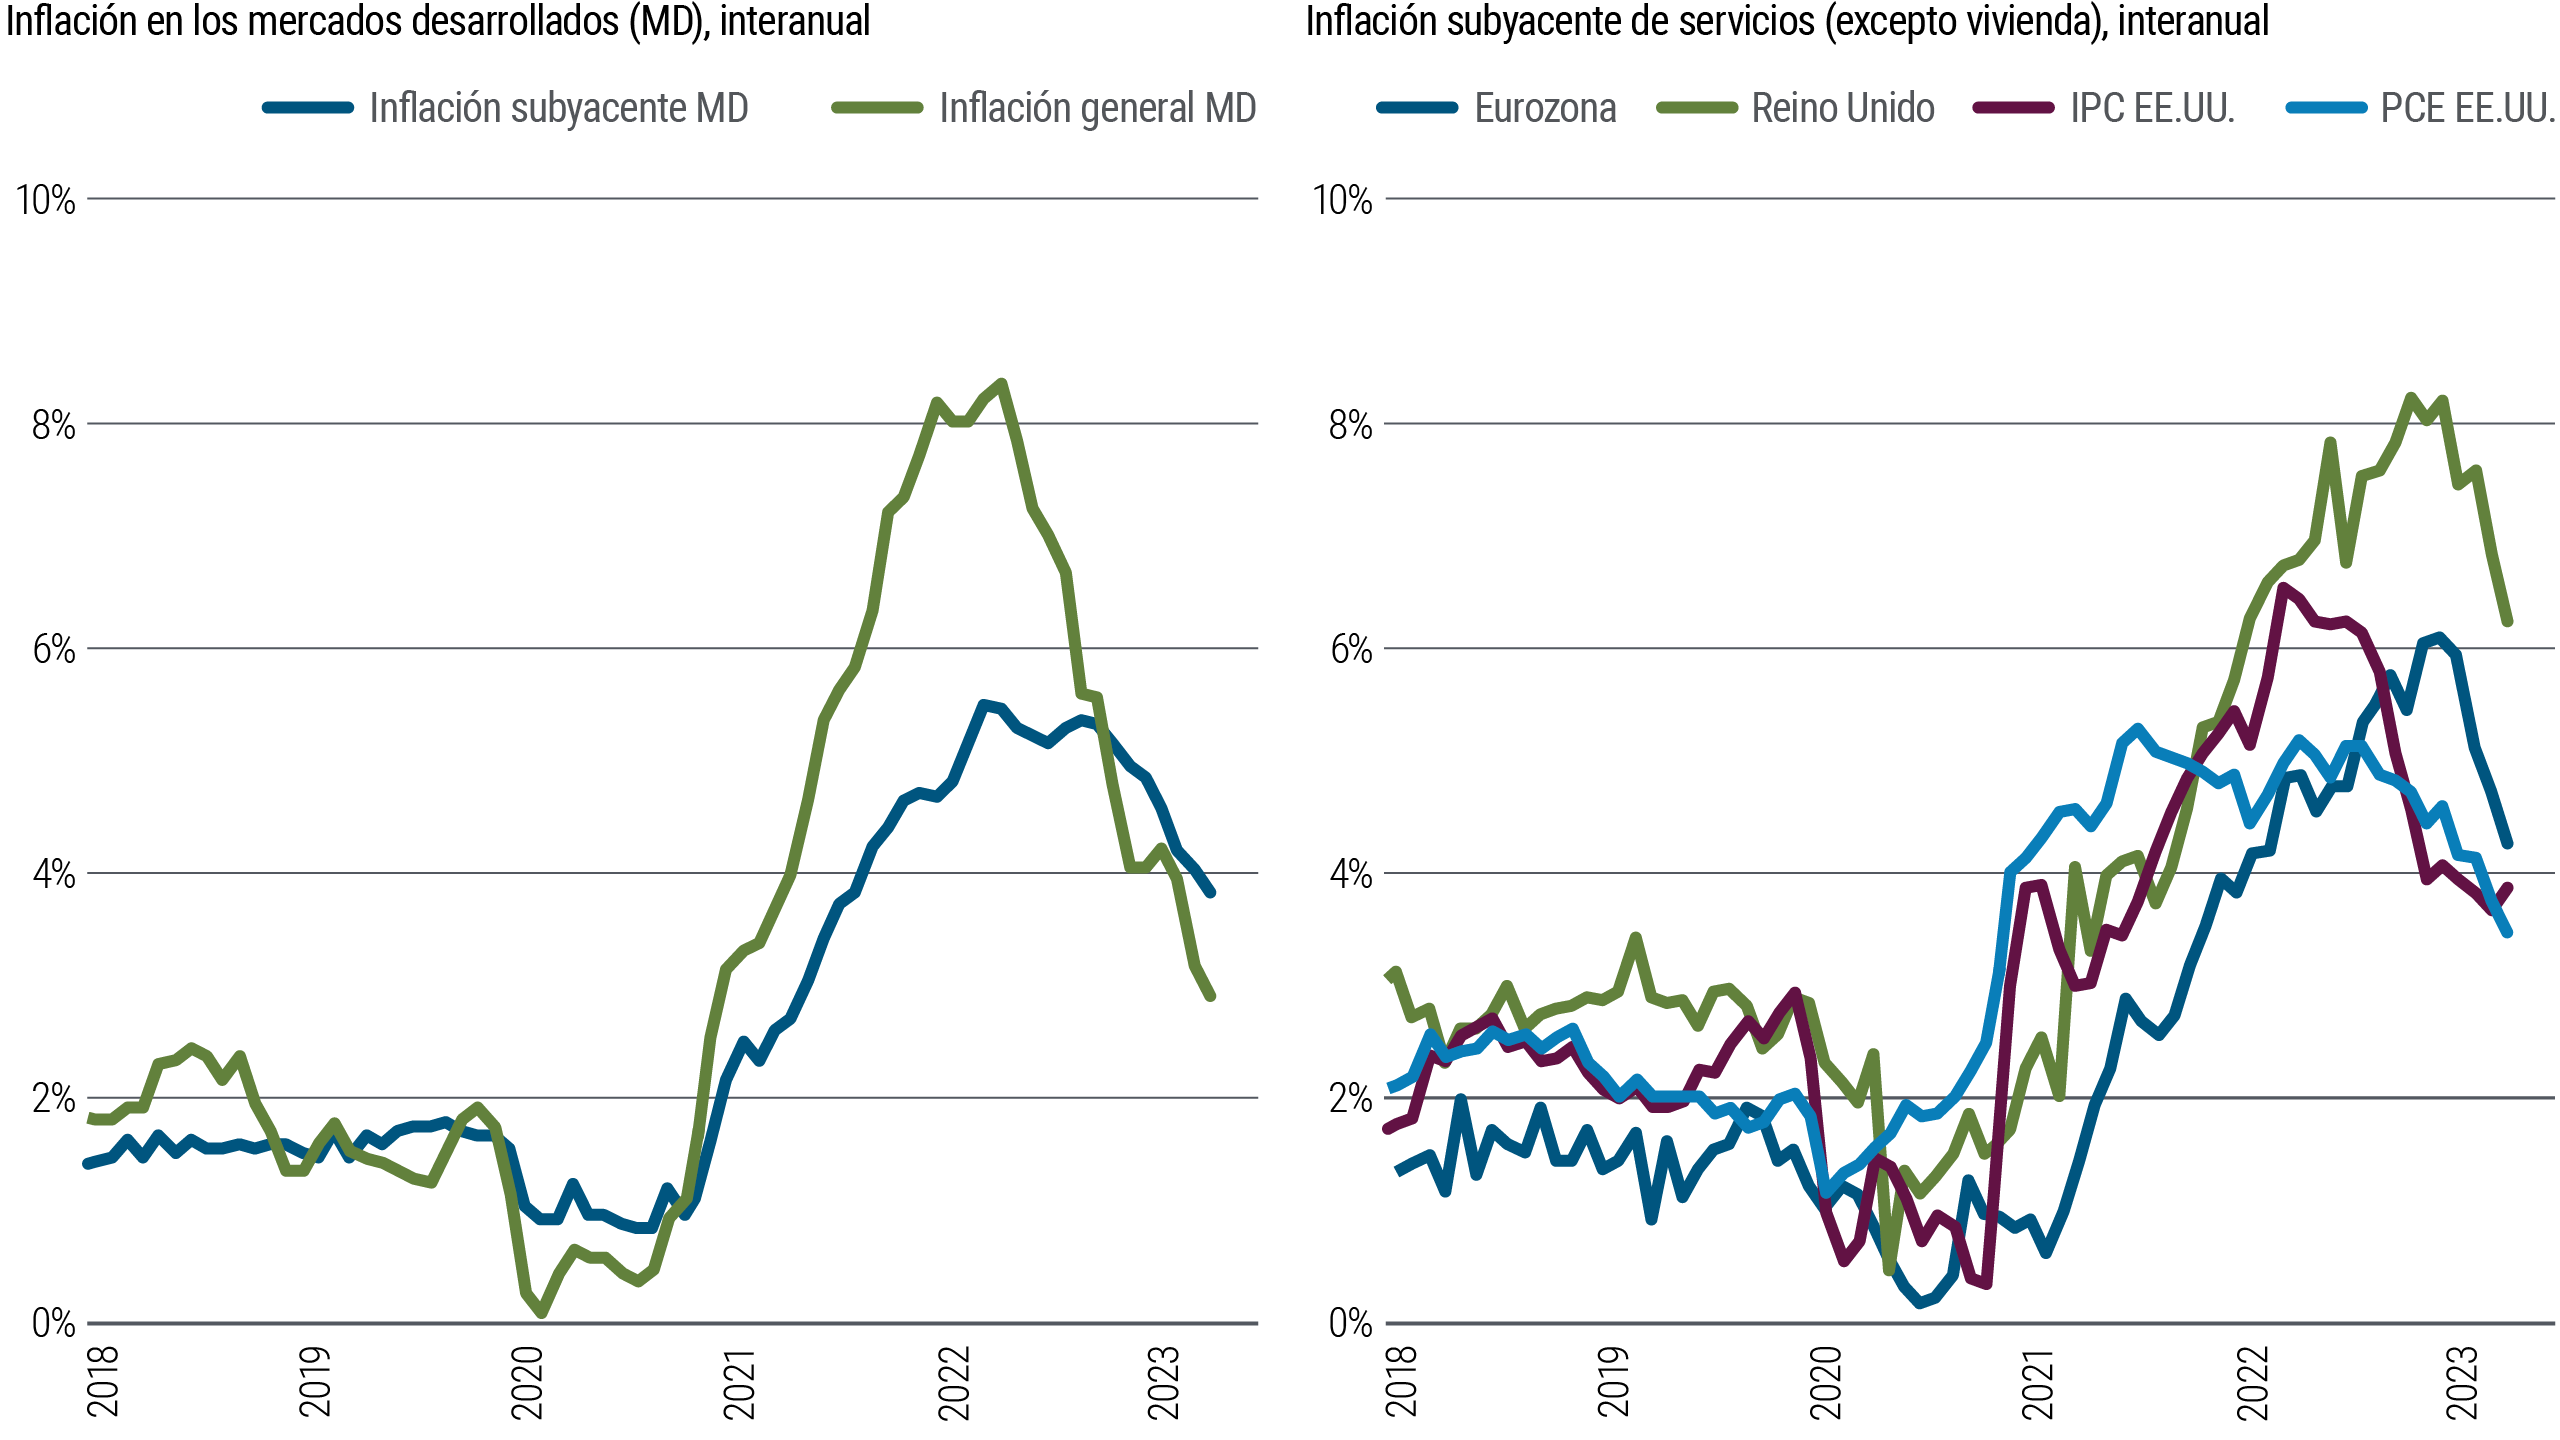 Figure 1 consists of two line charts side by side. The chart at the left shows the annual percentage change in headline and core inflation for developed market economies from Jan. 2018 through Nov. 2023. The chart at the right shows the annual percentage change in core services ex shelter inflation for the U.S. (both CPI and PCE), the eurozone, and the U.K. over the same period. Headline inflation touched a low near 0% in early 2020 amid the pandemic, while the core measure hovered around 1.0% throughout much of 2020. Both then rose sharply, with headline inflation peaking above 8% in late 2022 and core rising above 5% around that time. Both measures have since retreated, with headline and core inflation falling back to about 3.0% and 4.0%, respectively. Core services ex shelter inflation followed a similar path, falling to lows of about 1% or lower in mid-2020 to early 2021 in the U.S., eurozone, and U.K. before rising sharply to a range of about 5% to 8%.  The measure has since eased into a range of about 4% to 6%.  The source for the data is Haver Analytics and PIMCO calculations as of 30 November 2023. DM is a GDP-weighted aggregate of euro area, U.K., U.S., Canada, and Japan.